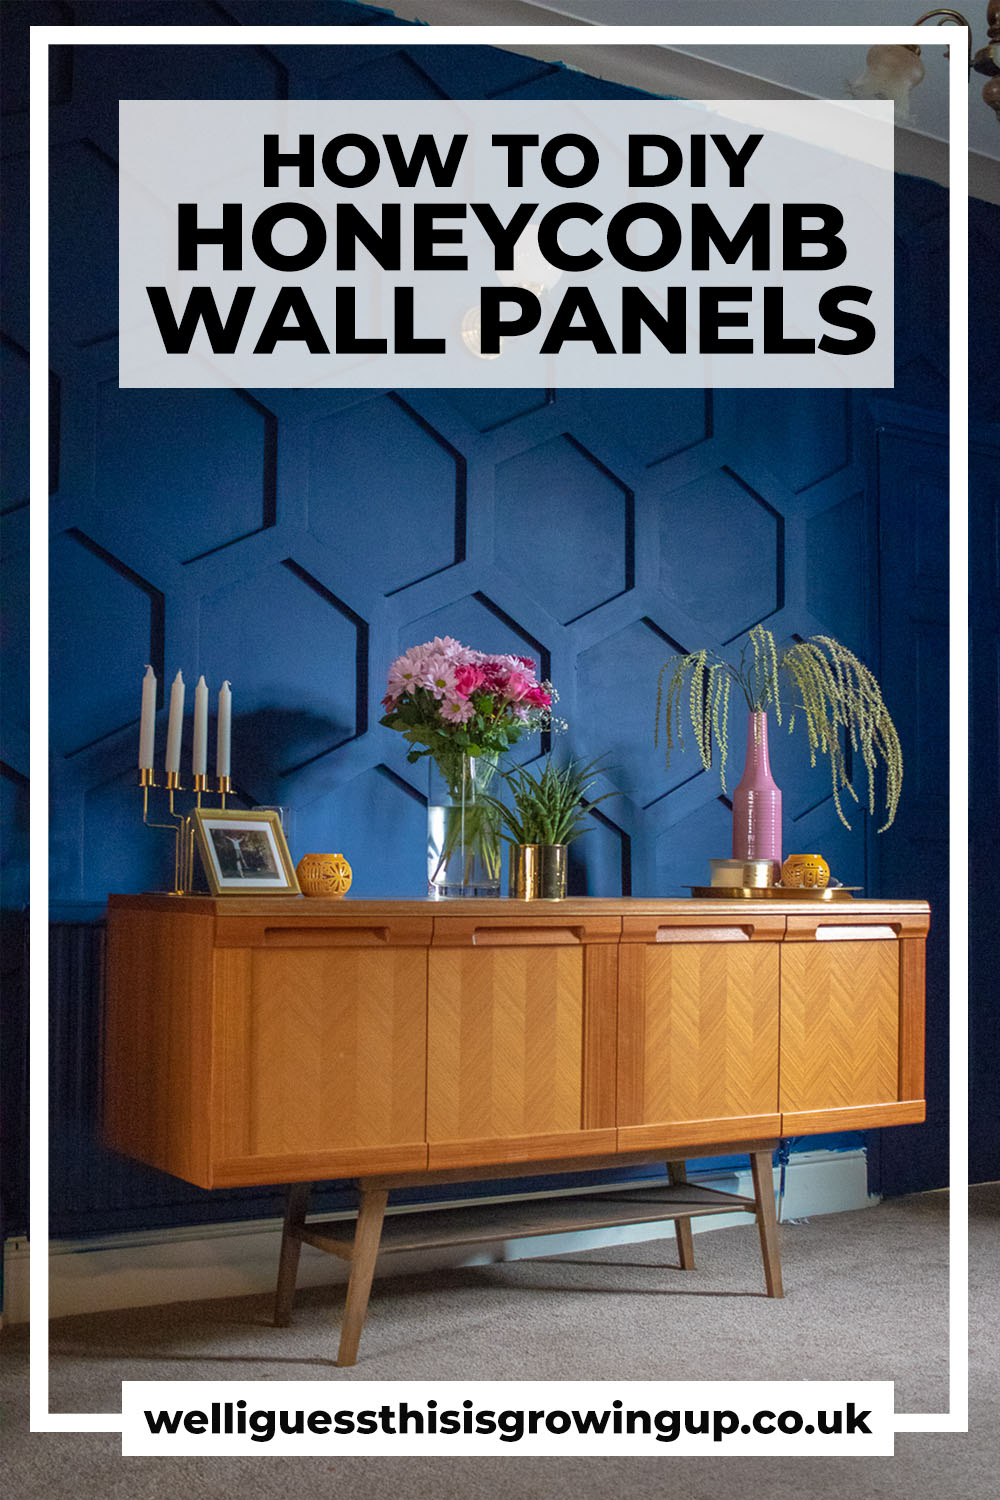 HOW TO DIY WALL PANELLING